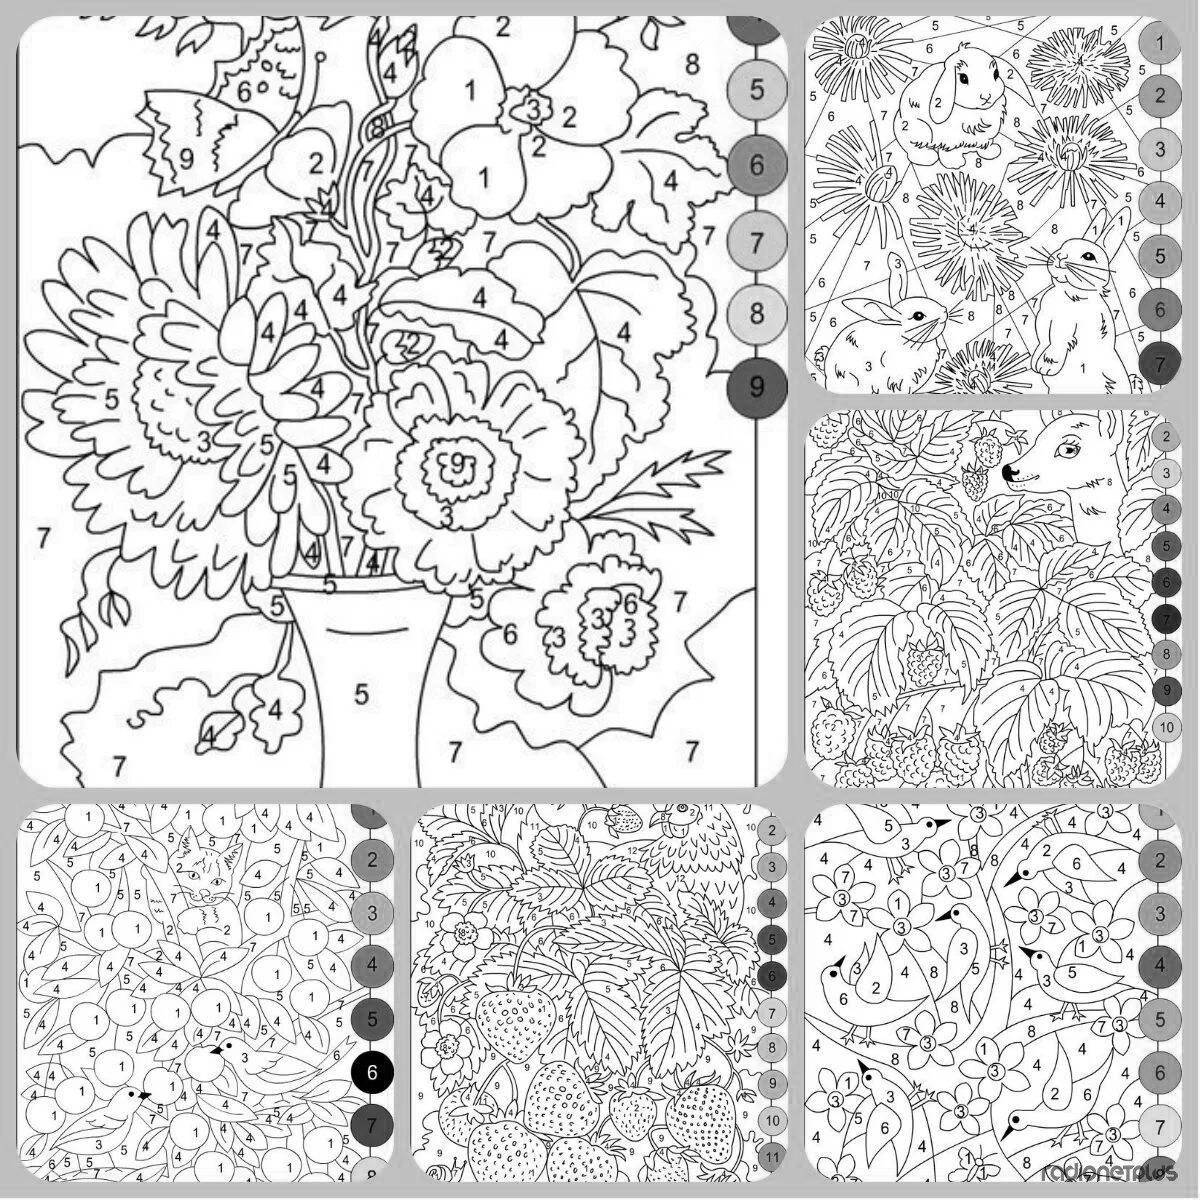 Enable coloring by numbers #2